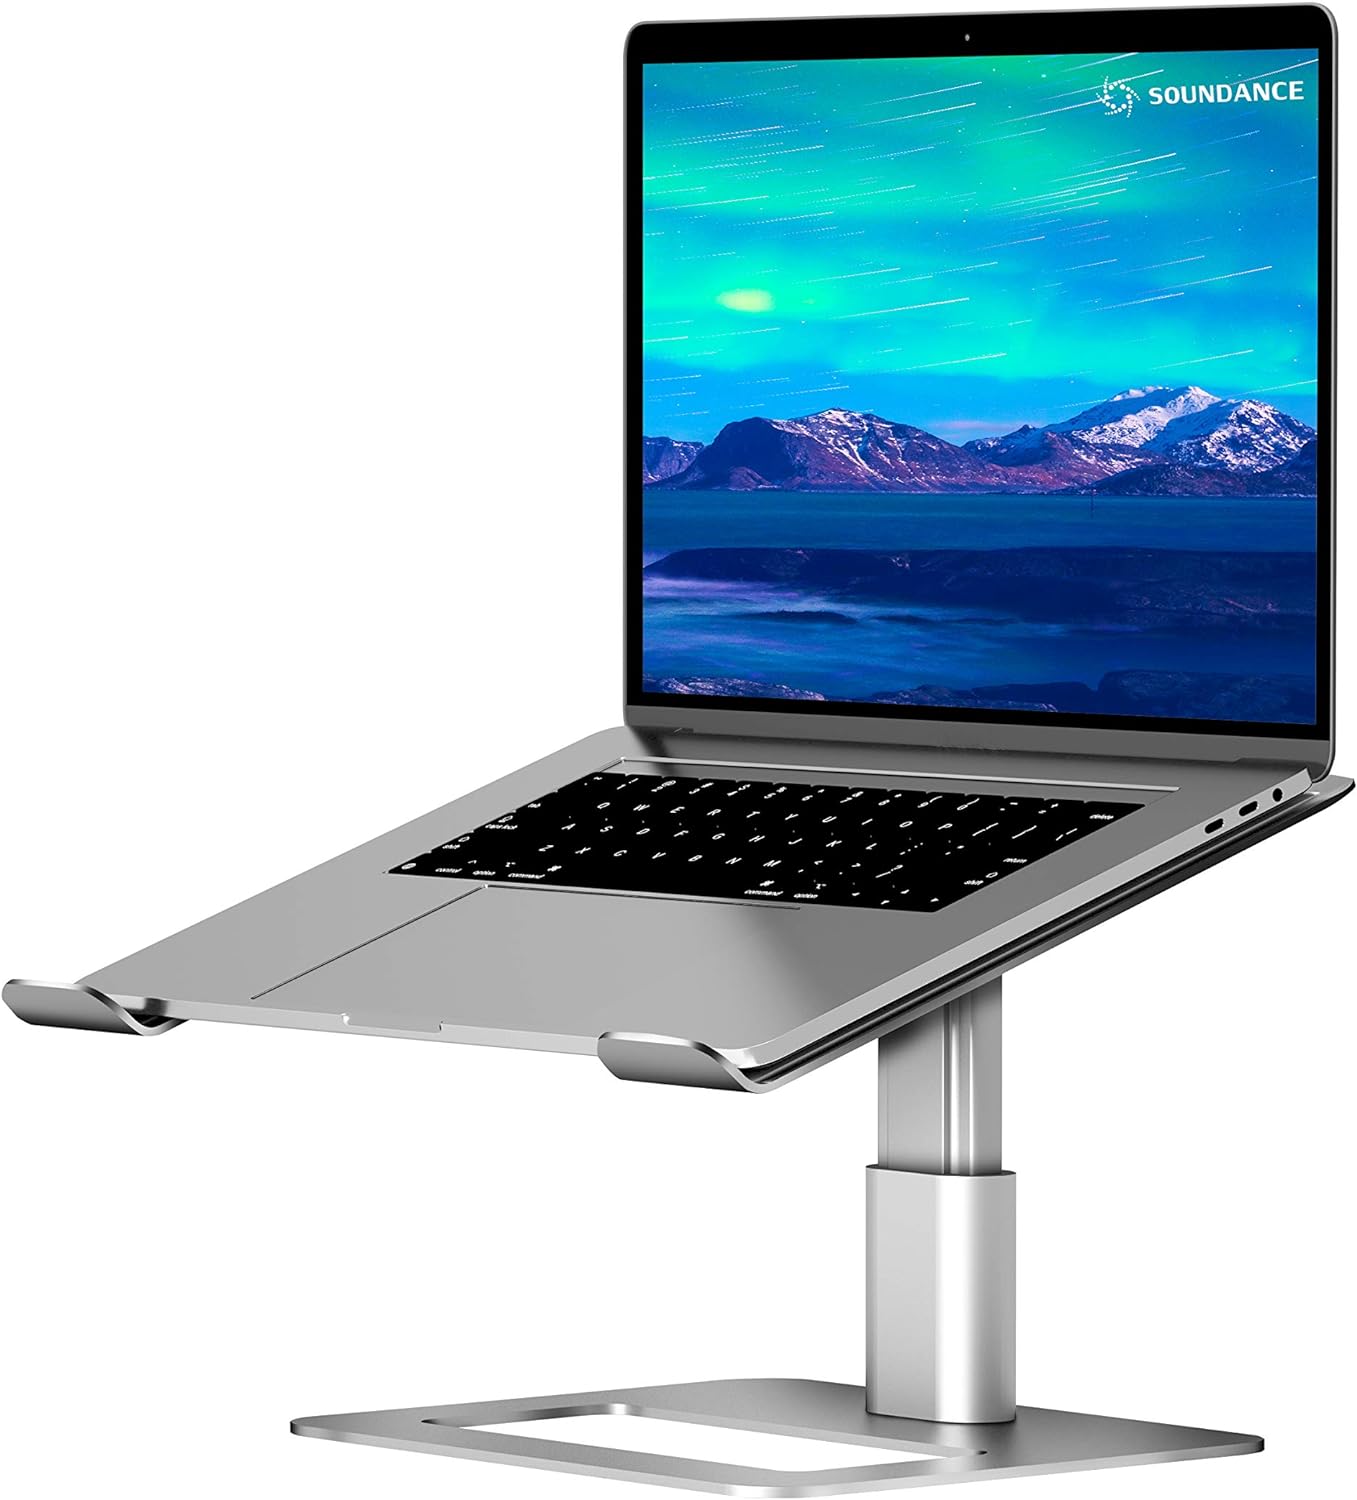 Aluminum Alloy Adjustable Laptop Stand HP Household Portable Laptop Stand Silver Suitable for Laptops Under 17.3 Inches Ergonomic Desk Compatible with MacBook Pro 